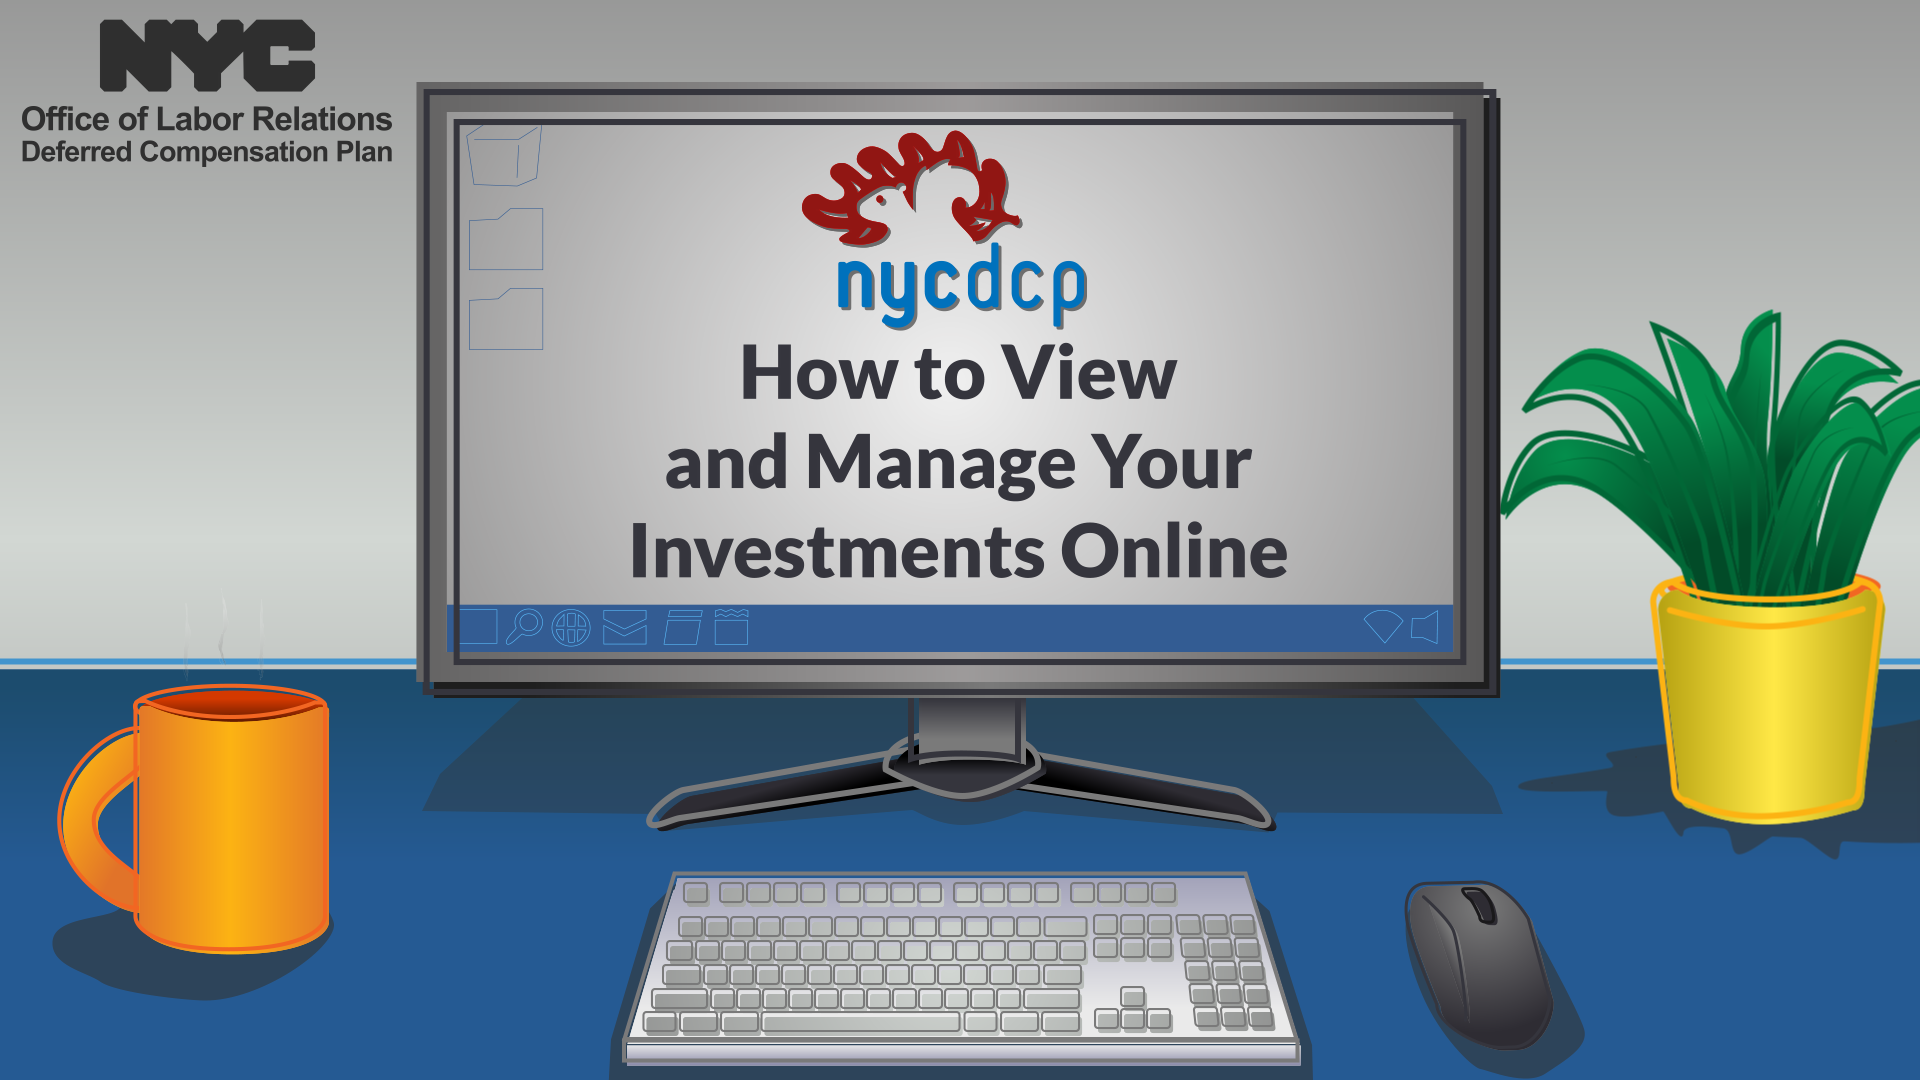 The words "How to View and Manage Investments Online" on a computer screen